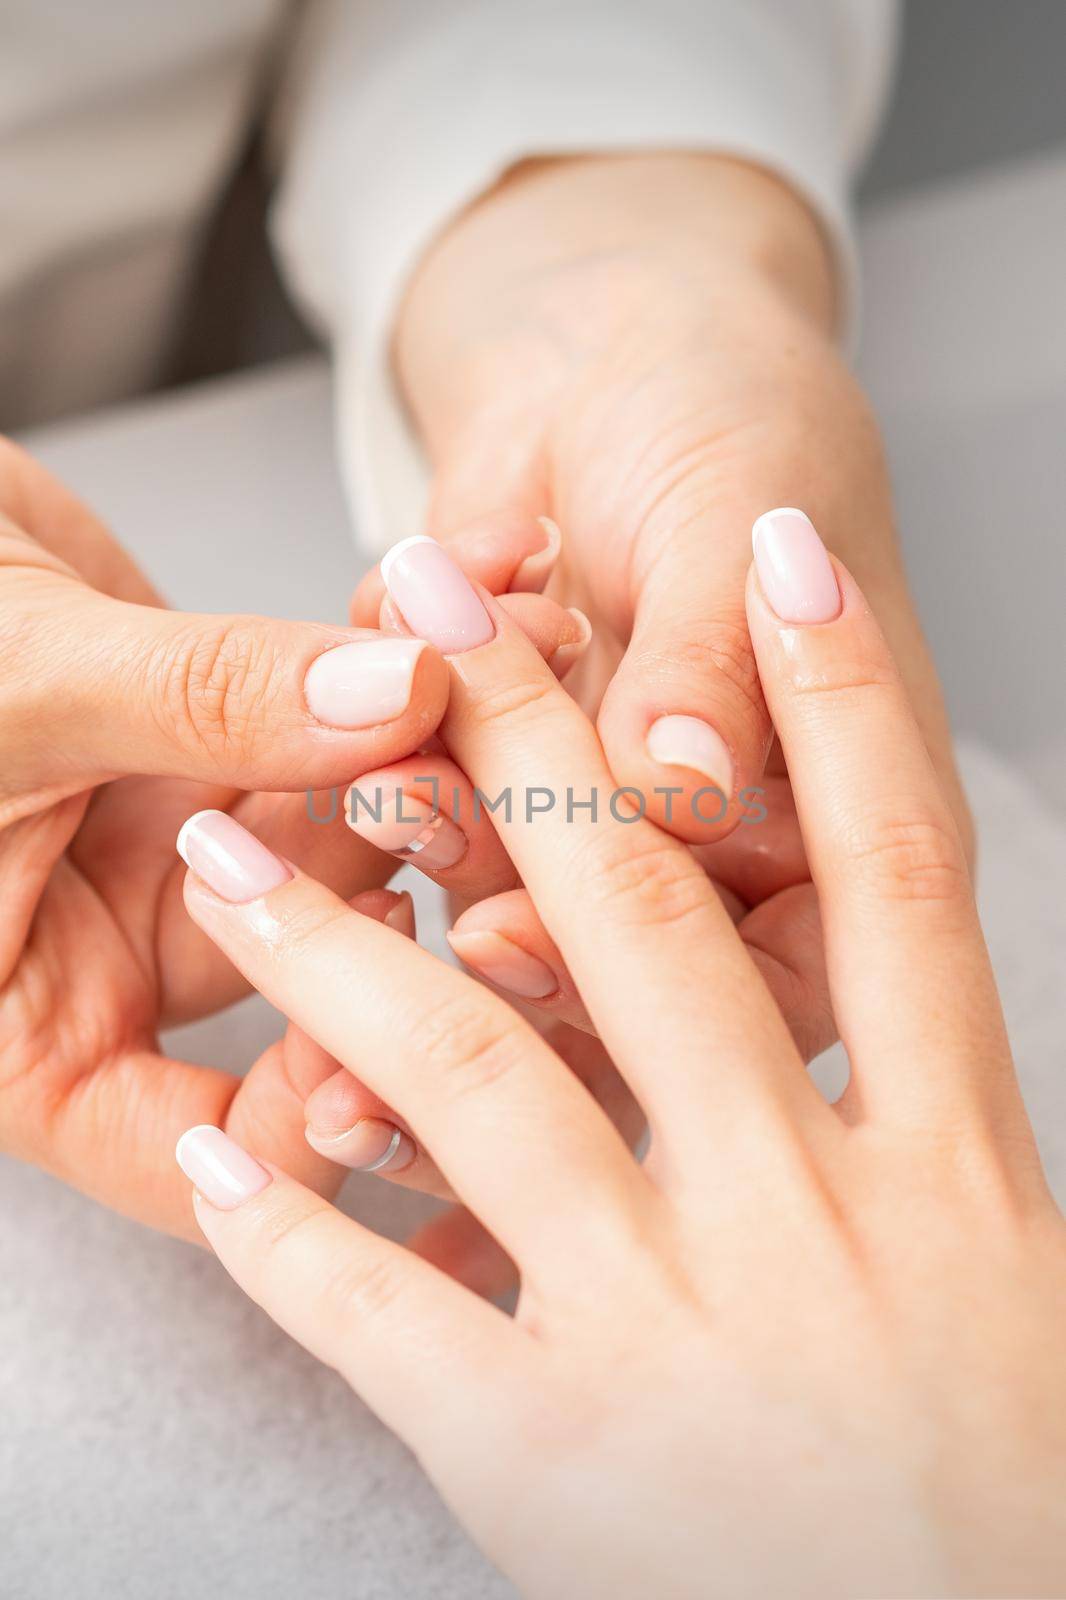 Manicure treatment at beauty spa. A hand of a woman getting a finger massage with oil in a nail salon